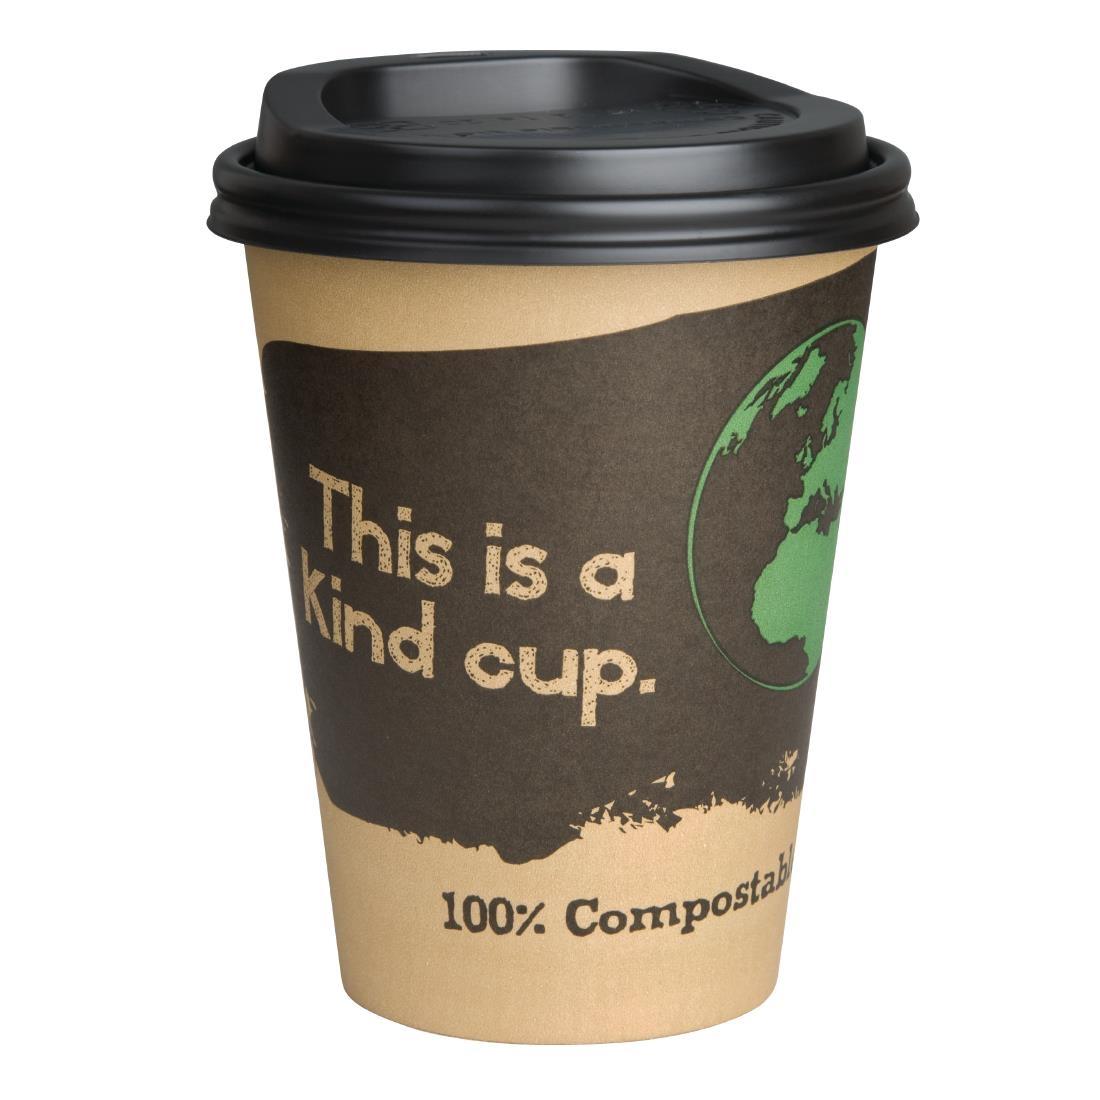 Fiesta Green 8oz Compostable Hot Cups and Lids Bundle (Pack of 50) - SA483  - 2